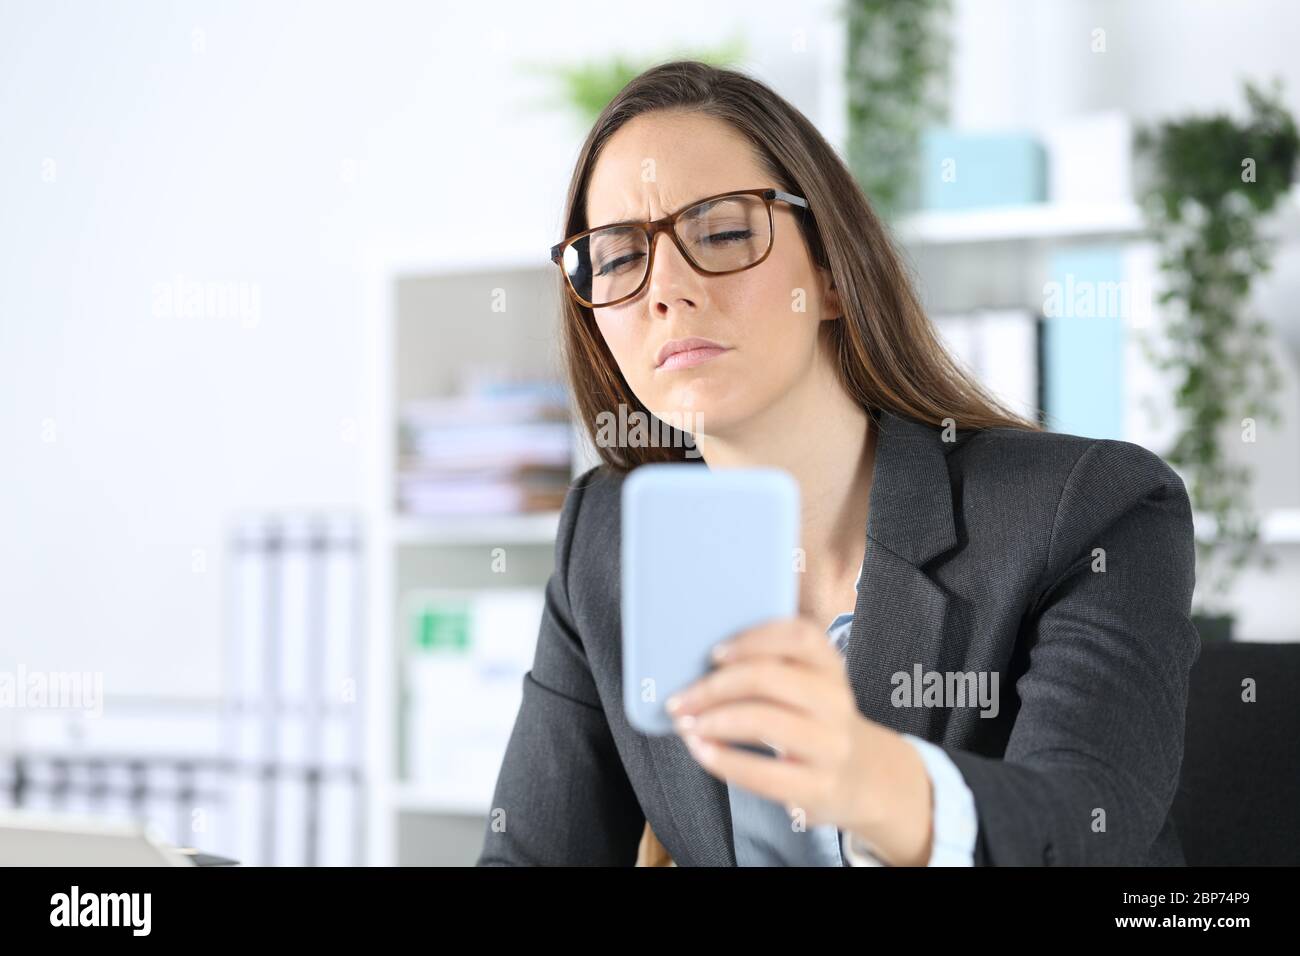 Executive woman wearing eyeglasses with eyesight problem trying to read on smart phone sitting on her desk at office Stock Photo